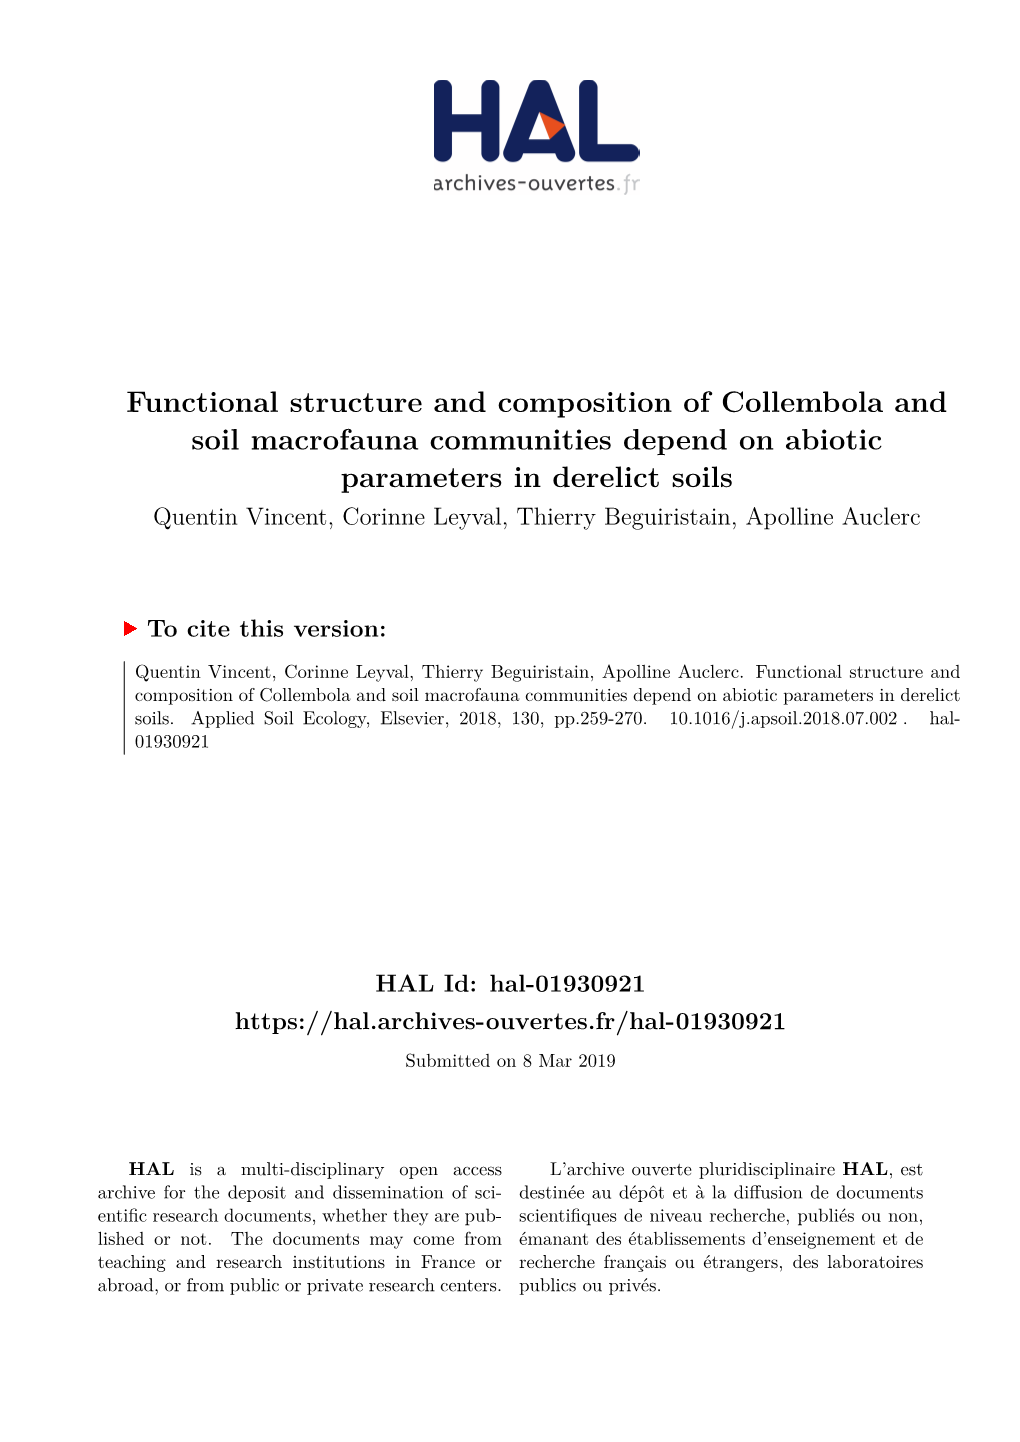 Functional Structure and Composition of Collembola and Soil Macrofauna